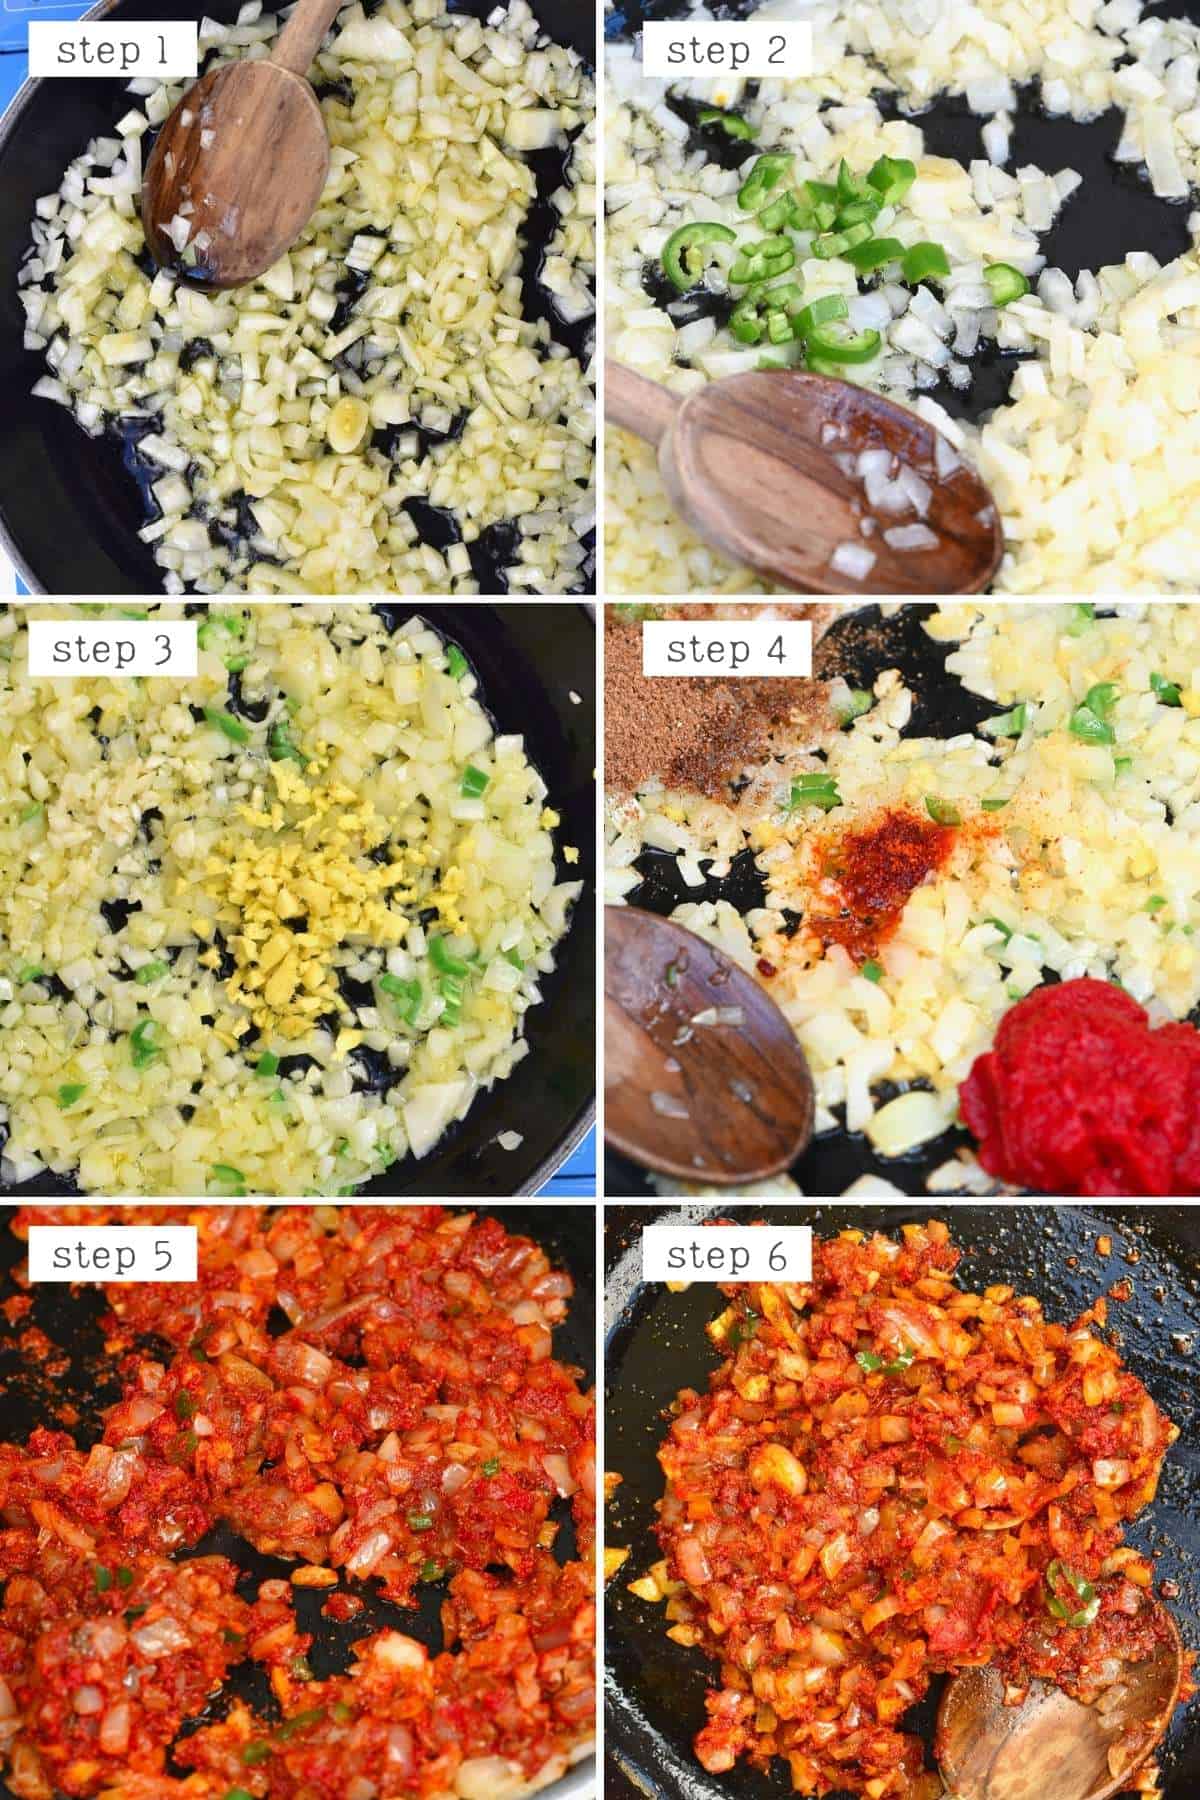 Steps for making butter chicken sauce